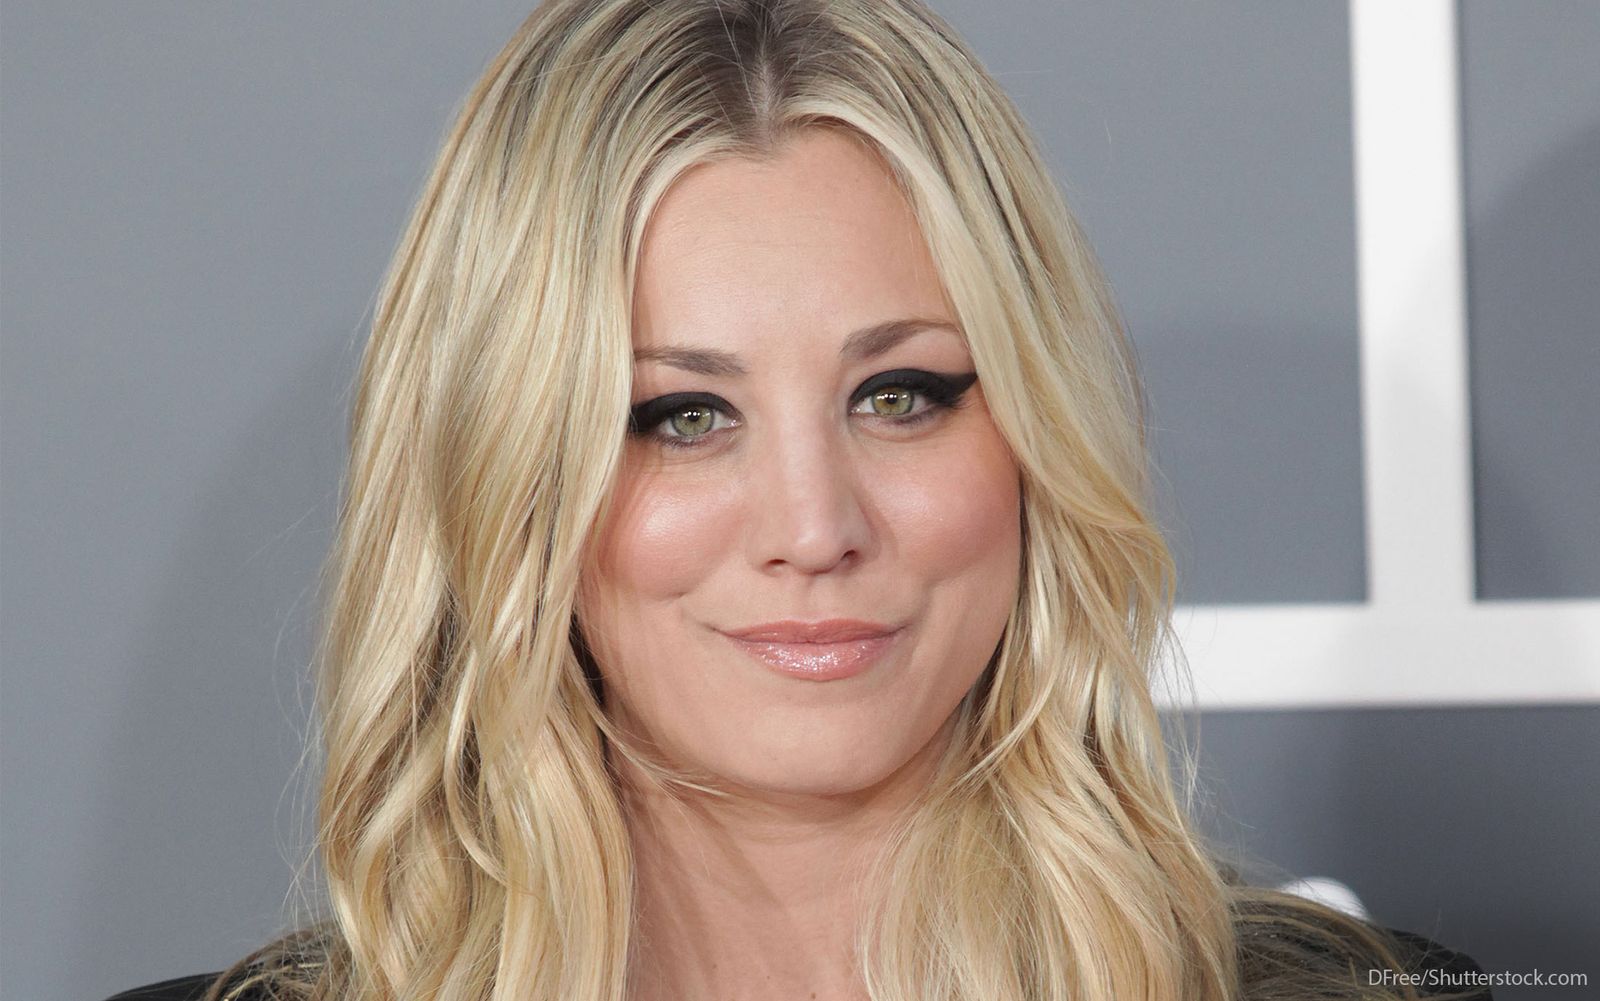 Kaley Cuoco Apologizes For Mishandling American Flag